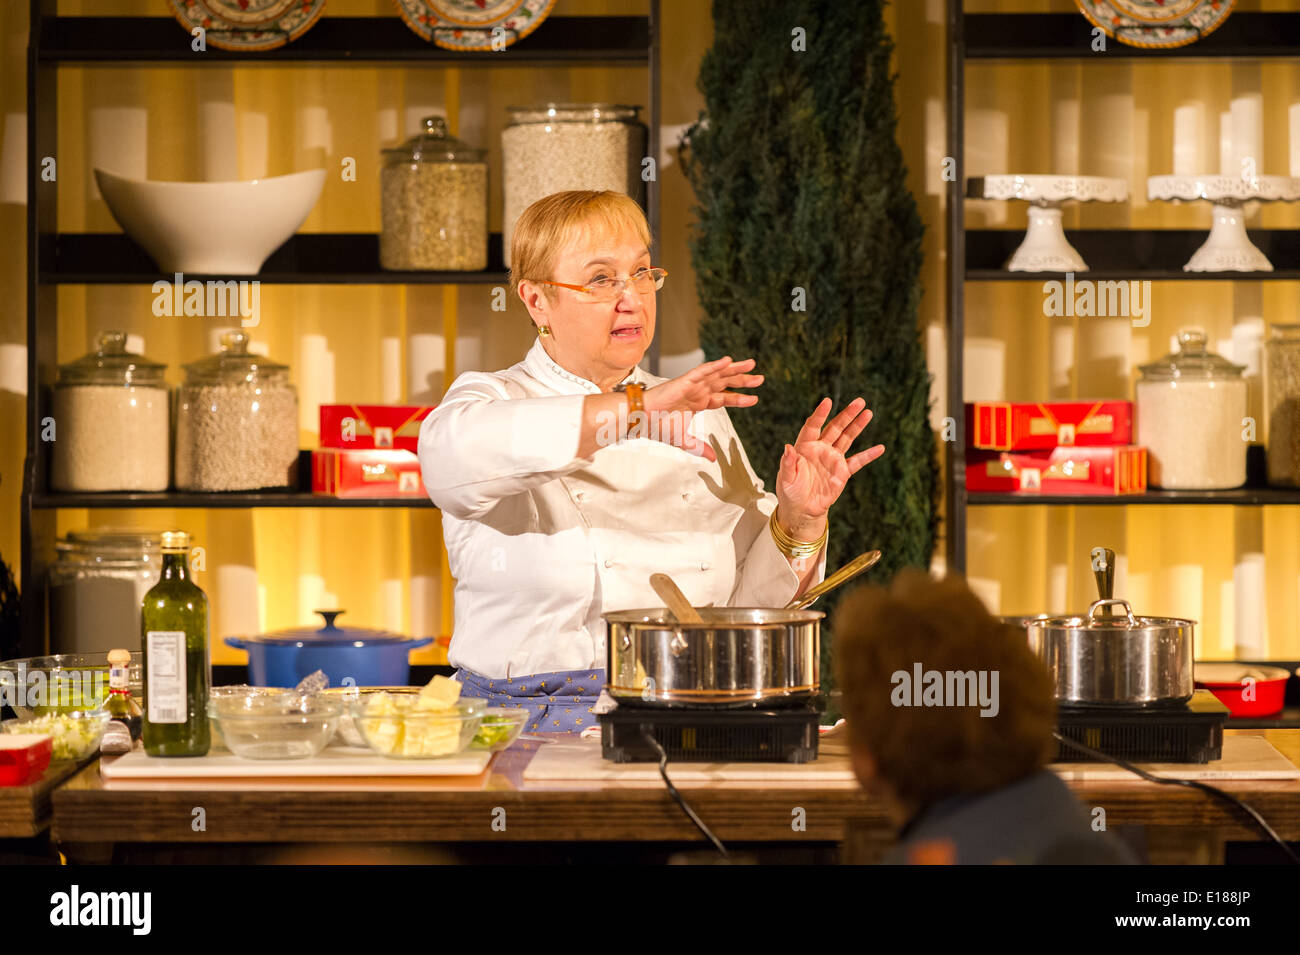 Chef Lidia Bastianich demonstrating for an event in Baltimore, Maryland, USA Stock Photo